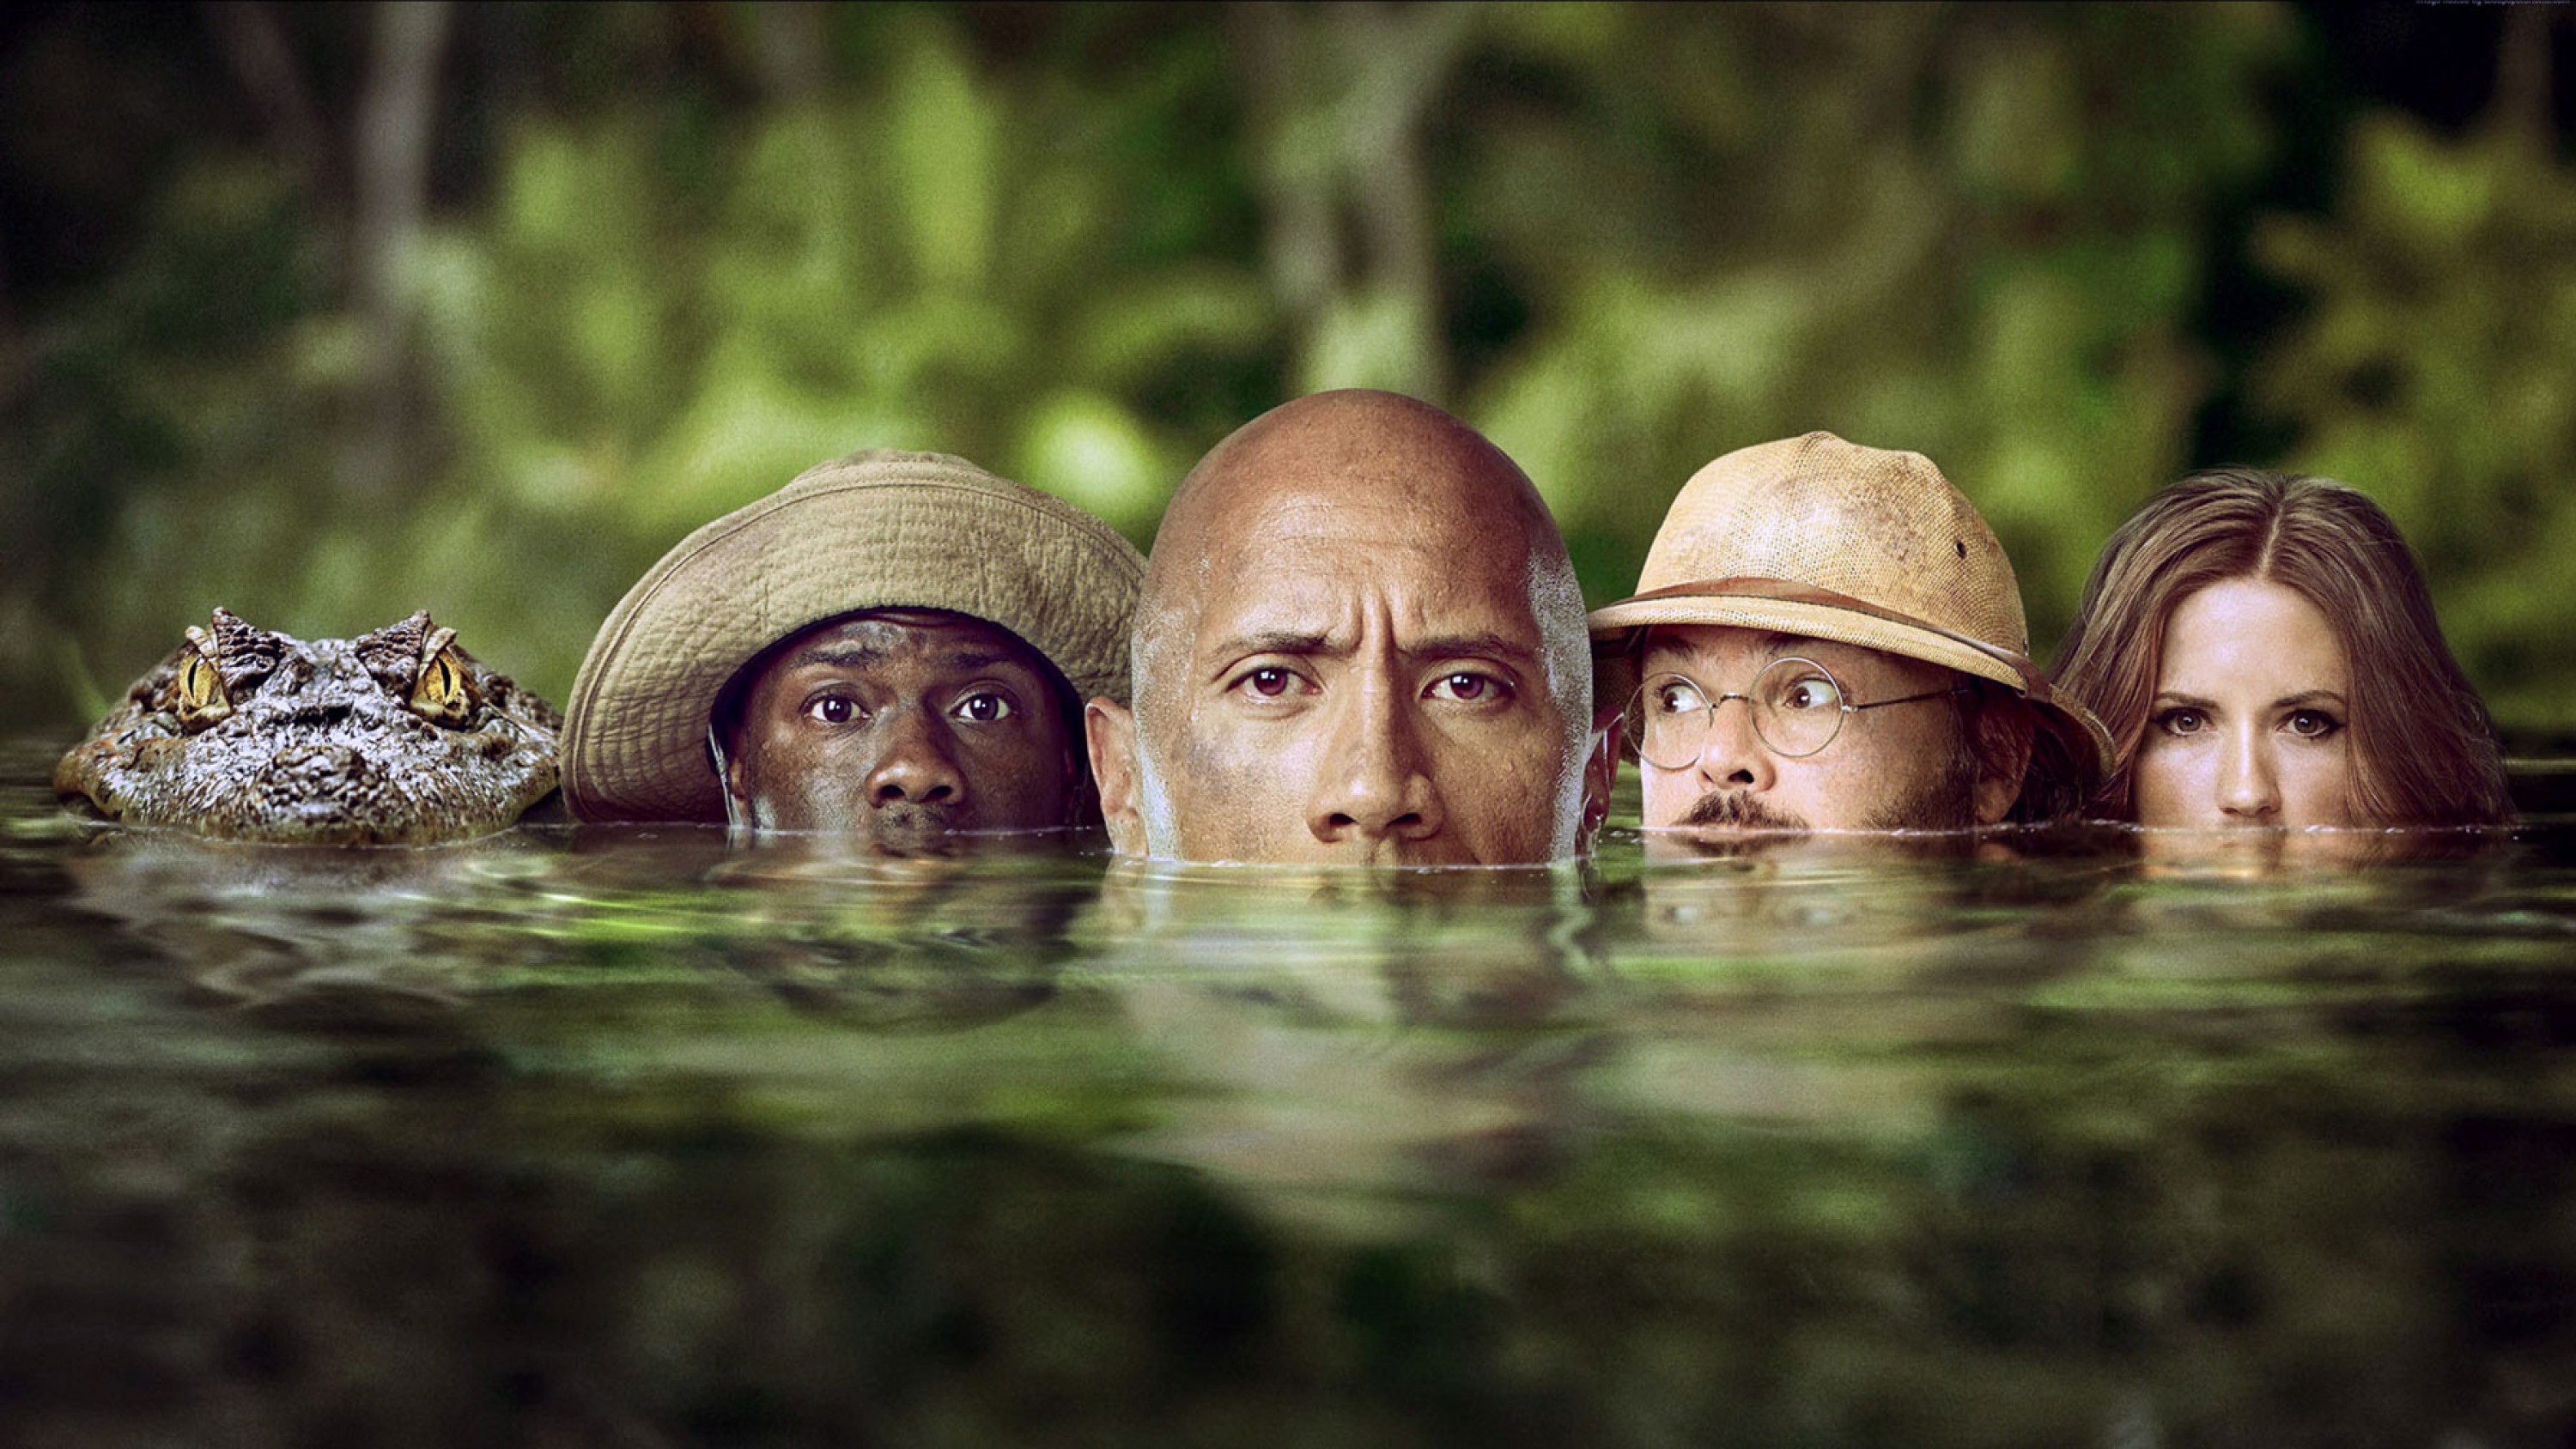 A film guide that looks at Jumanji: Welcome to the Jungle (2017), exploring